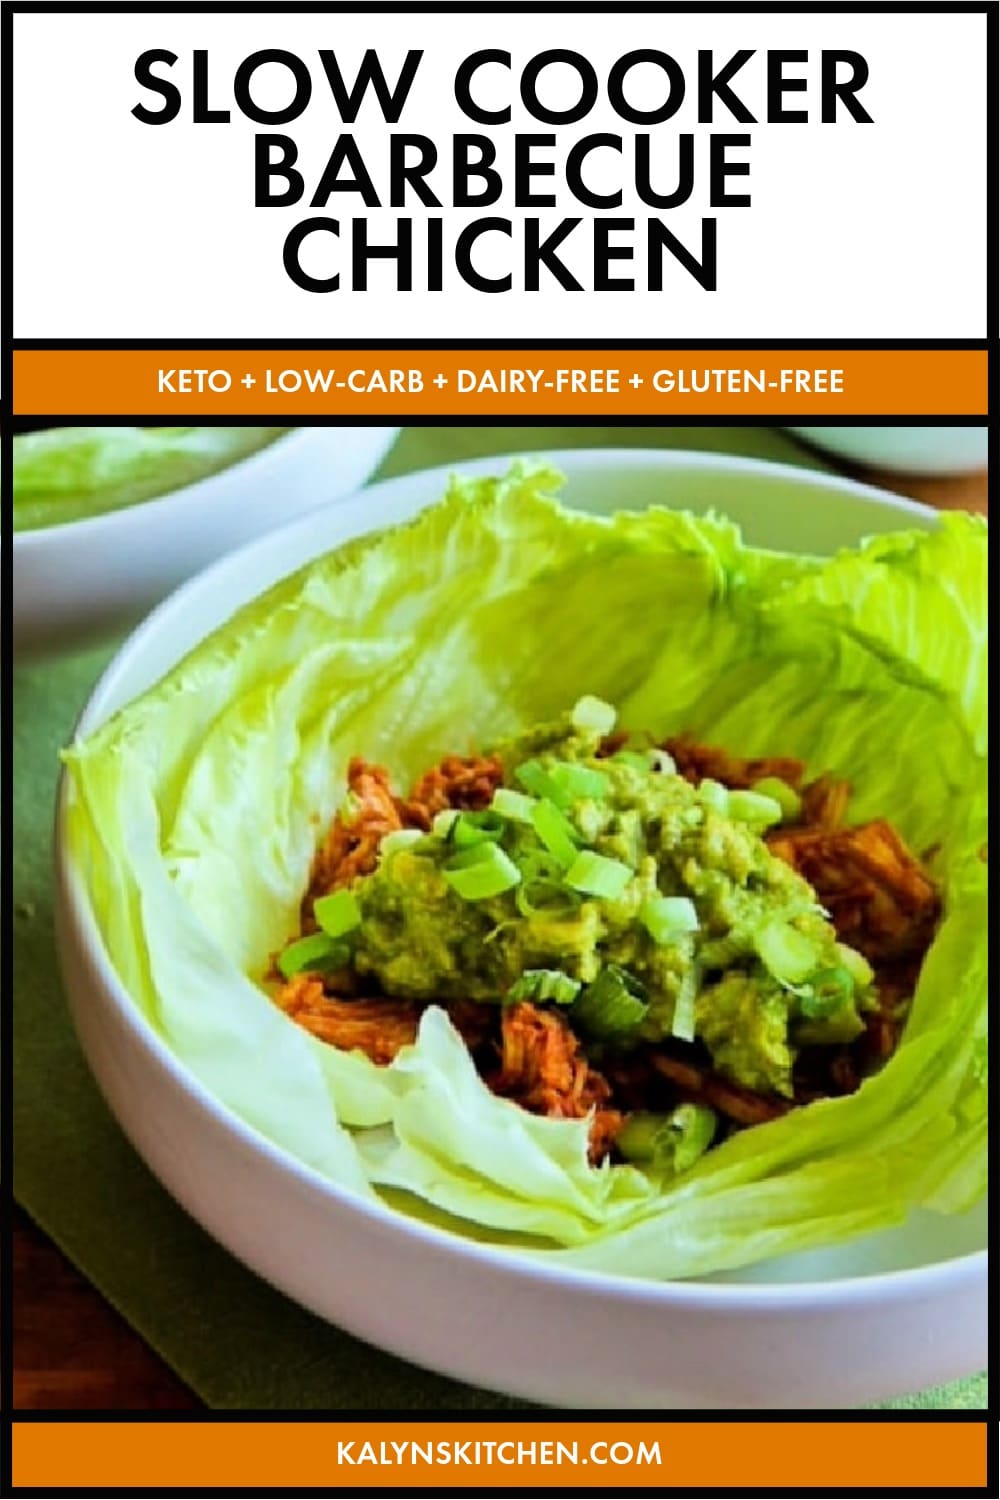 Pinterest image of Slow Cooker Barbecue Chicken